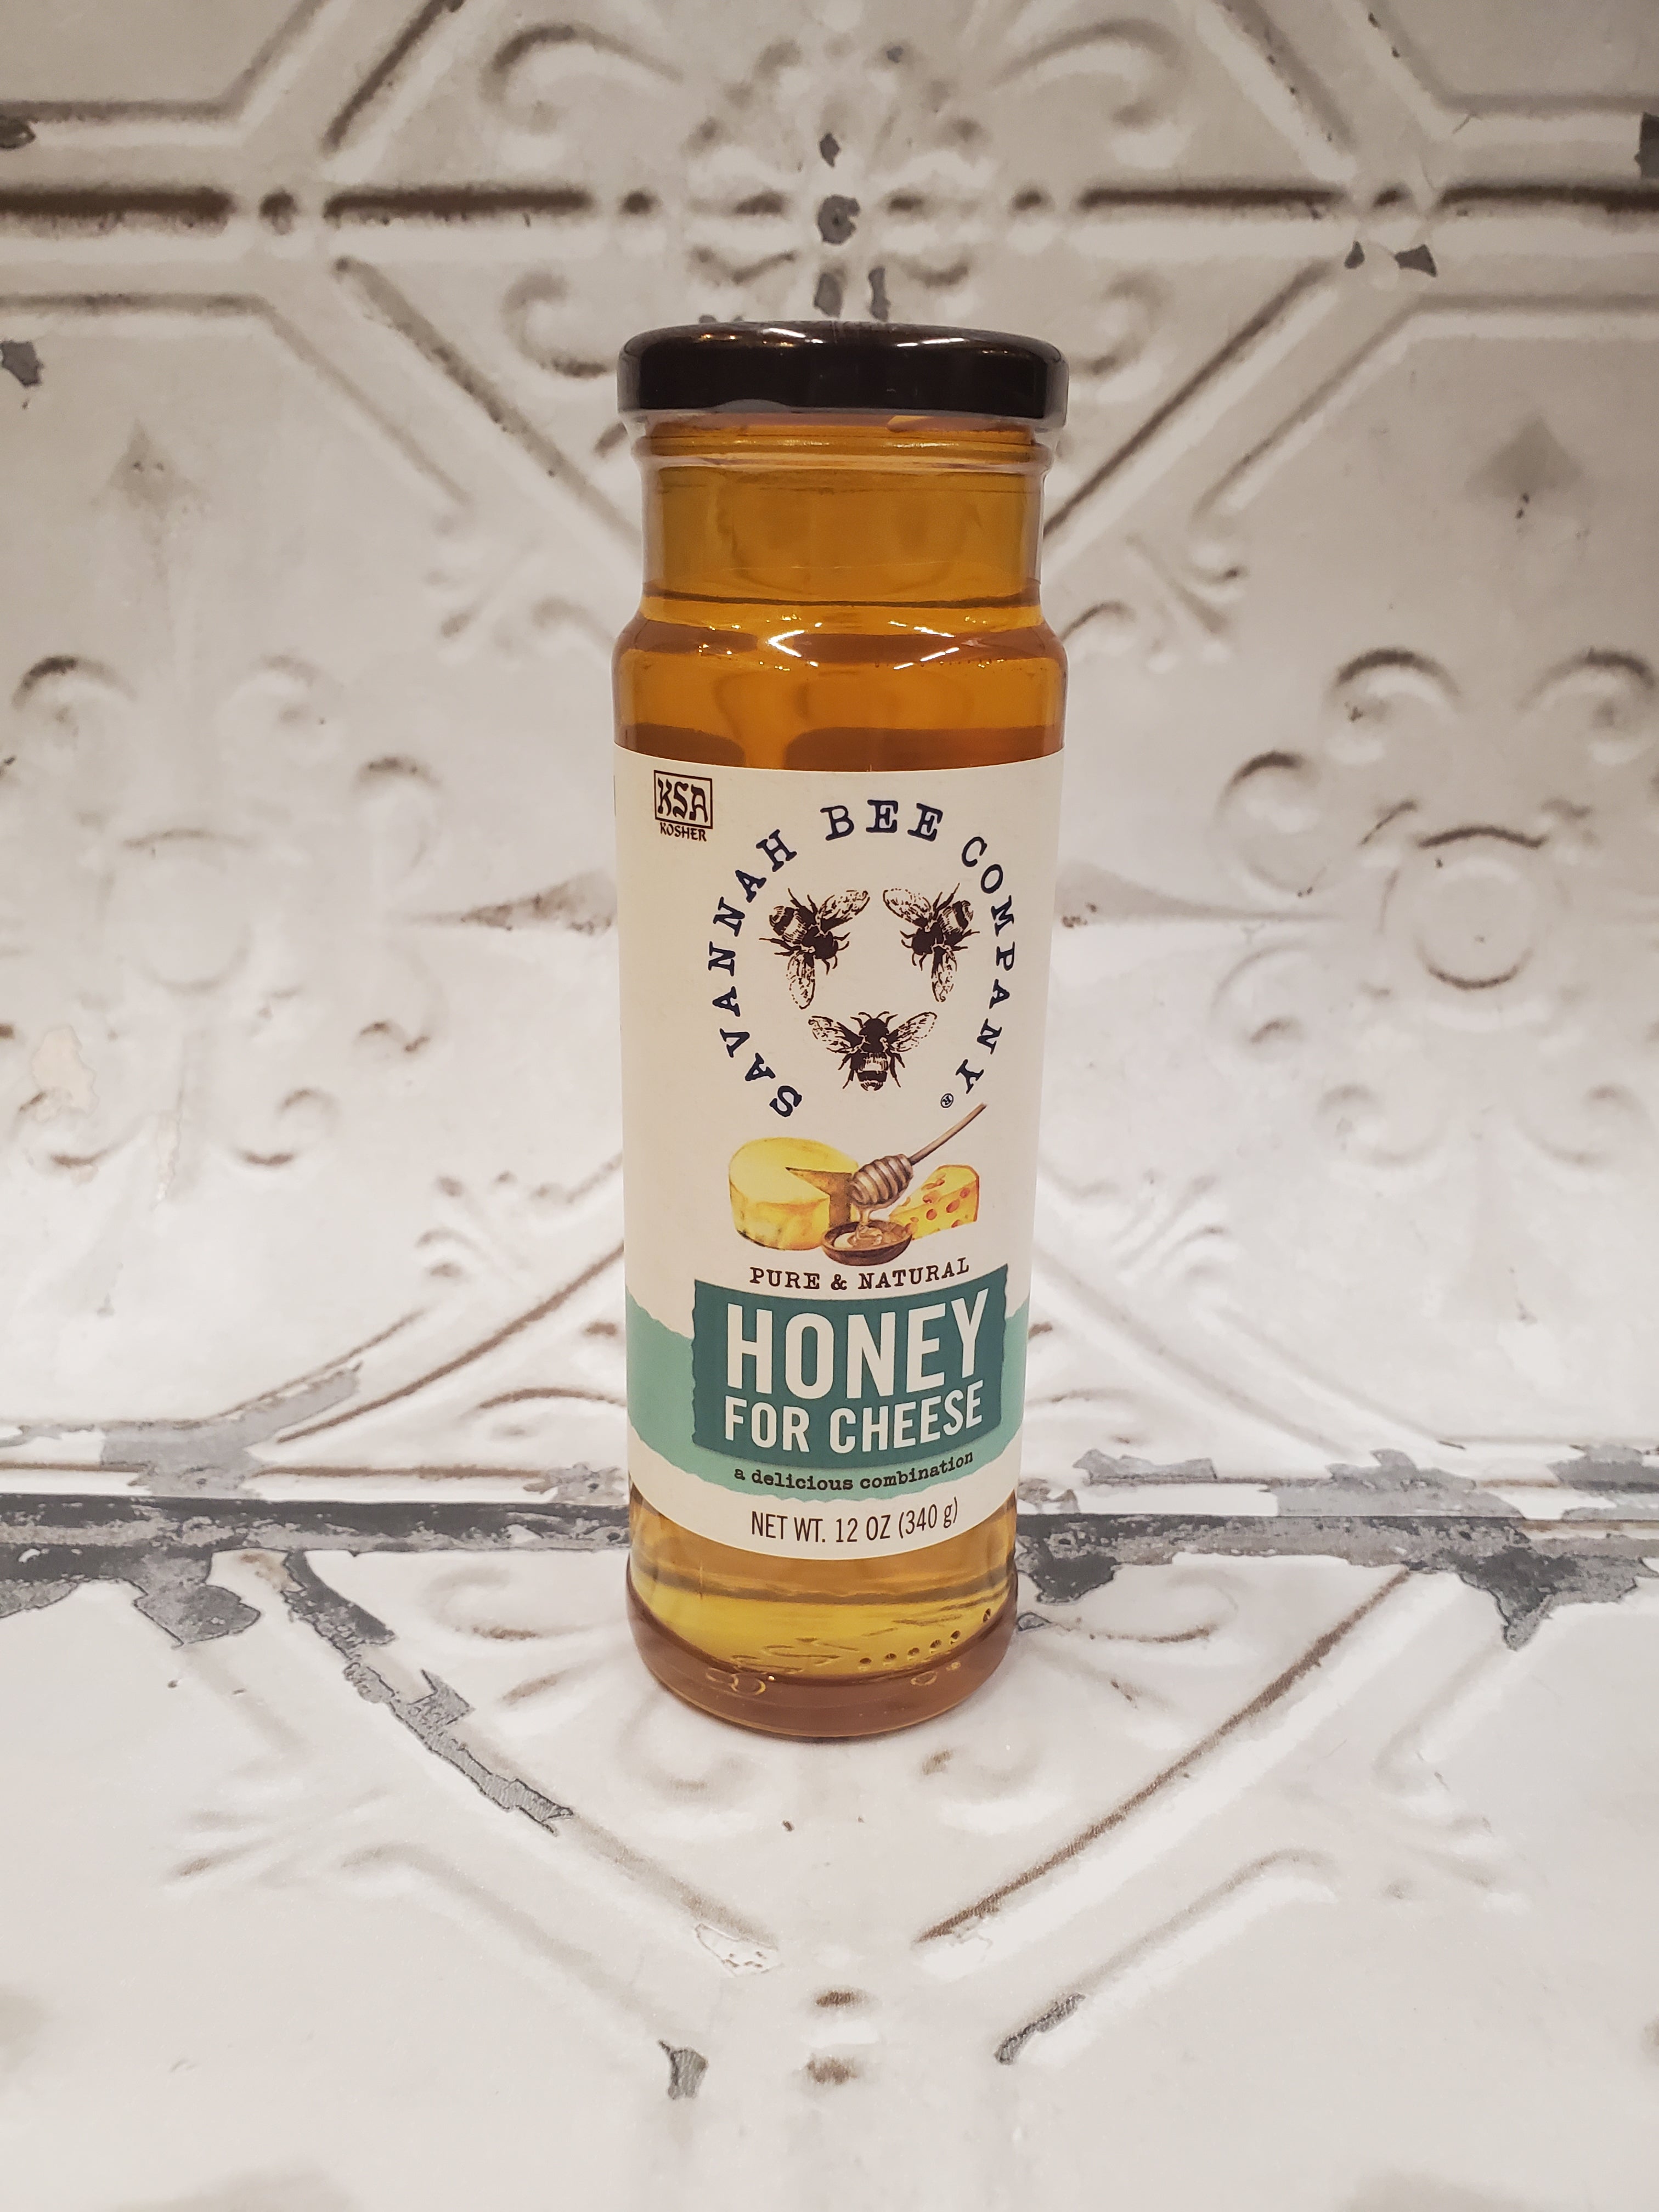 Savannah Bee Company Honey for Cheese - Olive Oil Etcetera 